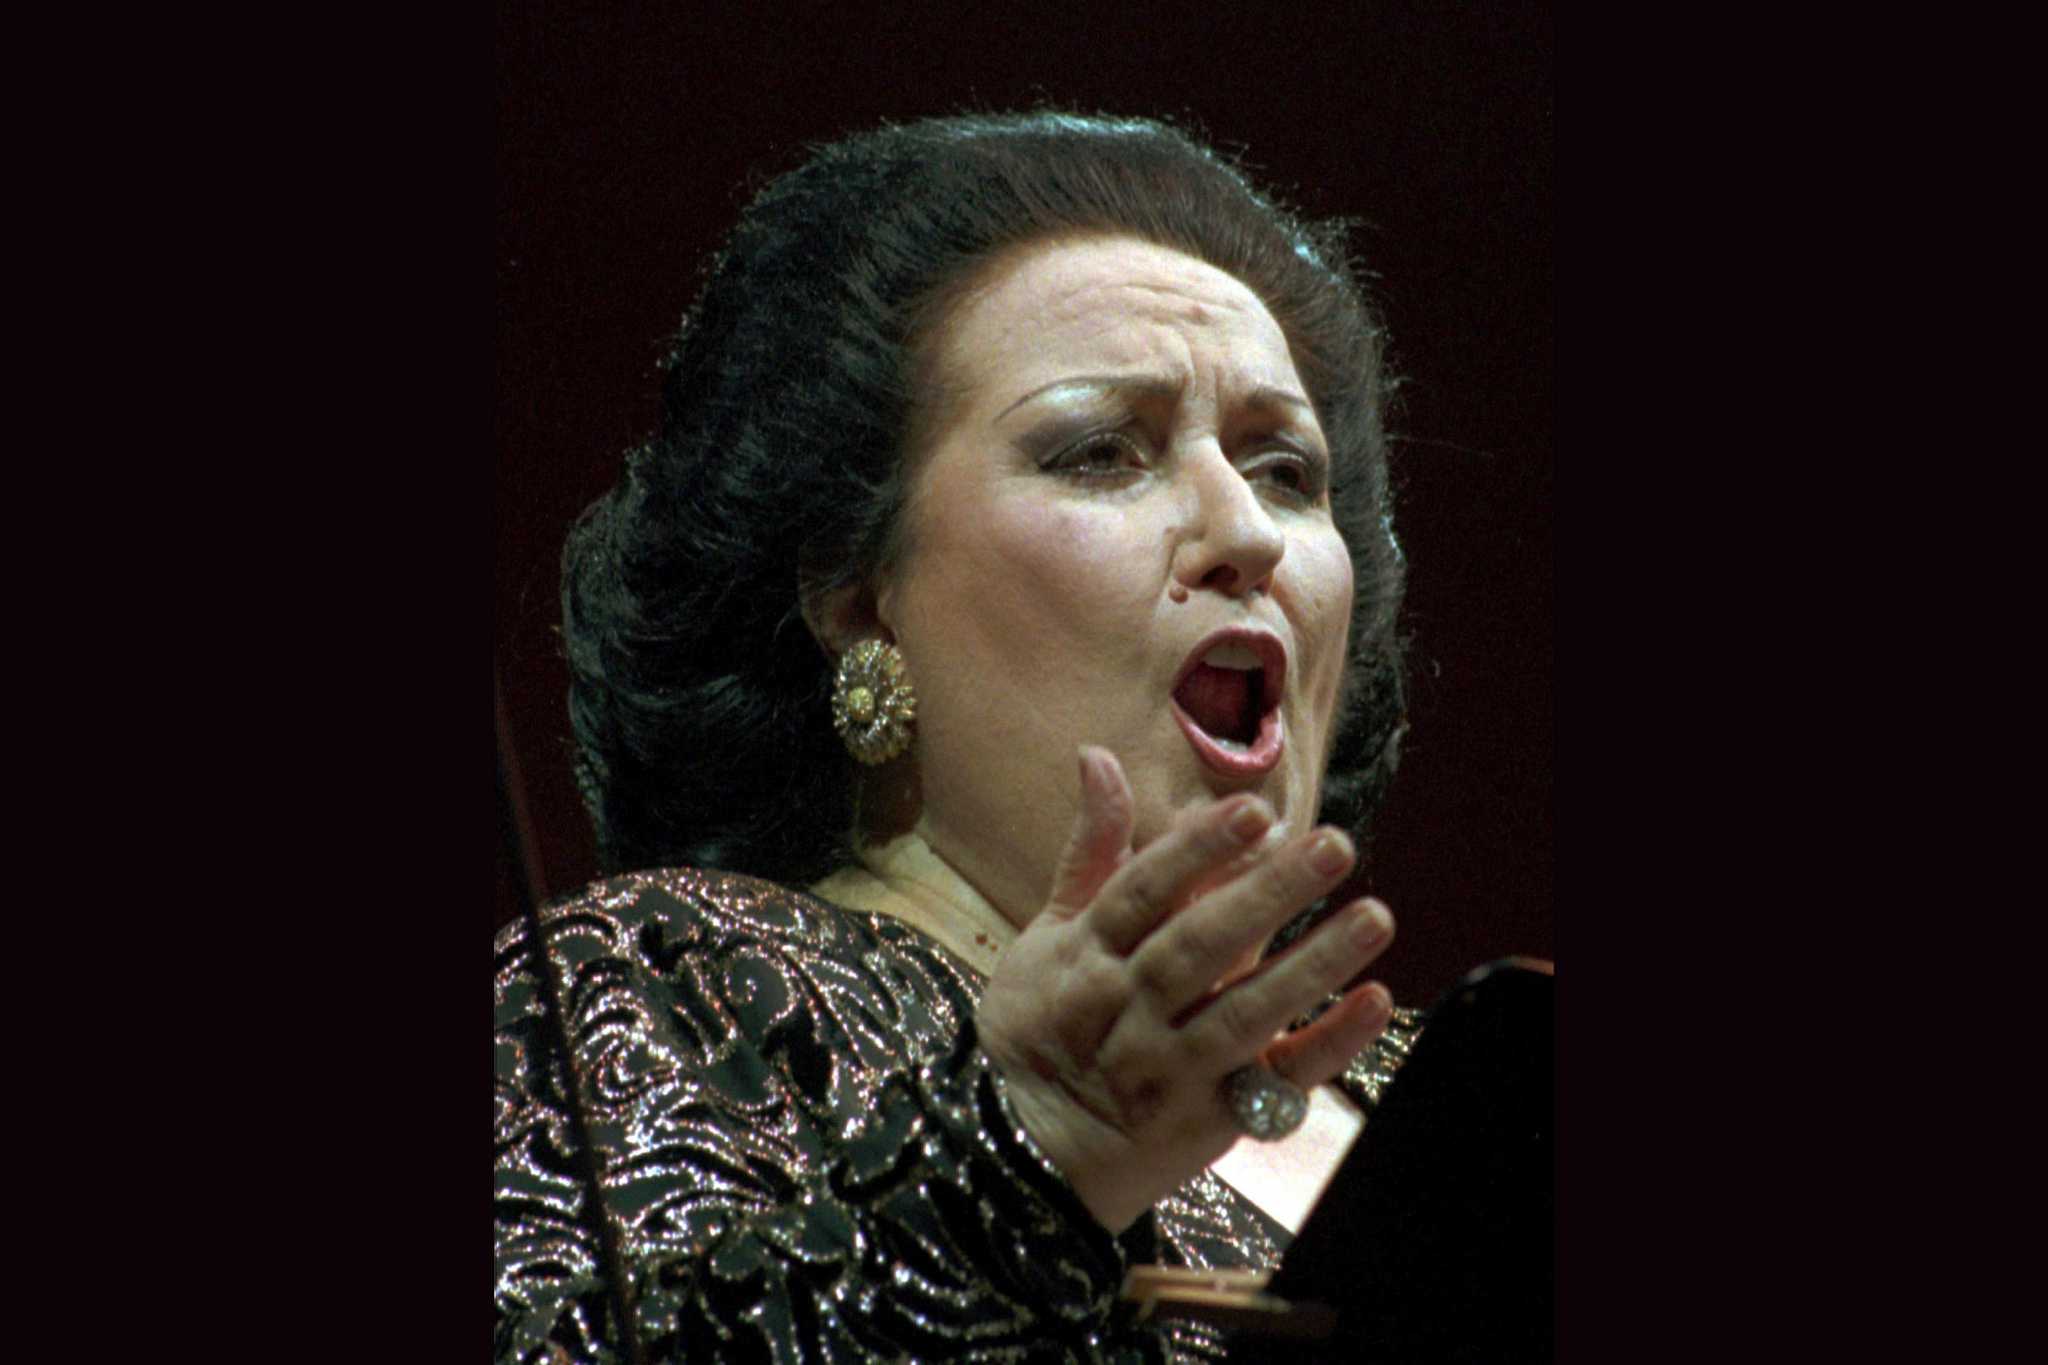 Montserrat Caballé Soprano Known For Her Flawless Tone And Versatility Dies At 85